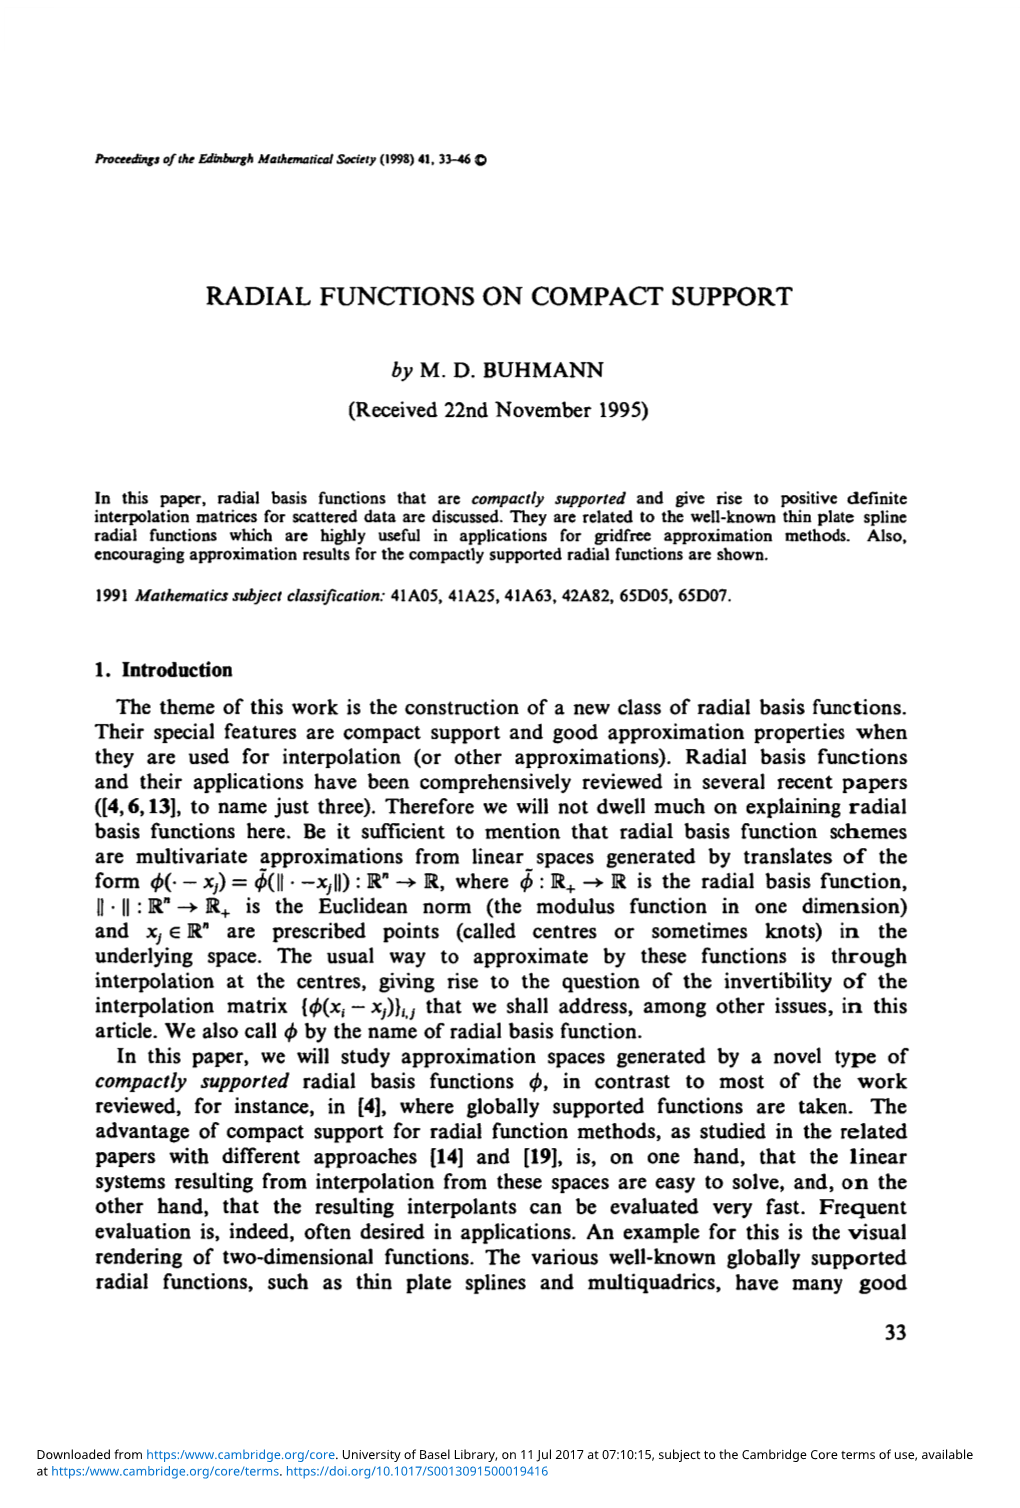 Radial Functions on Compact Support